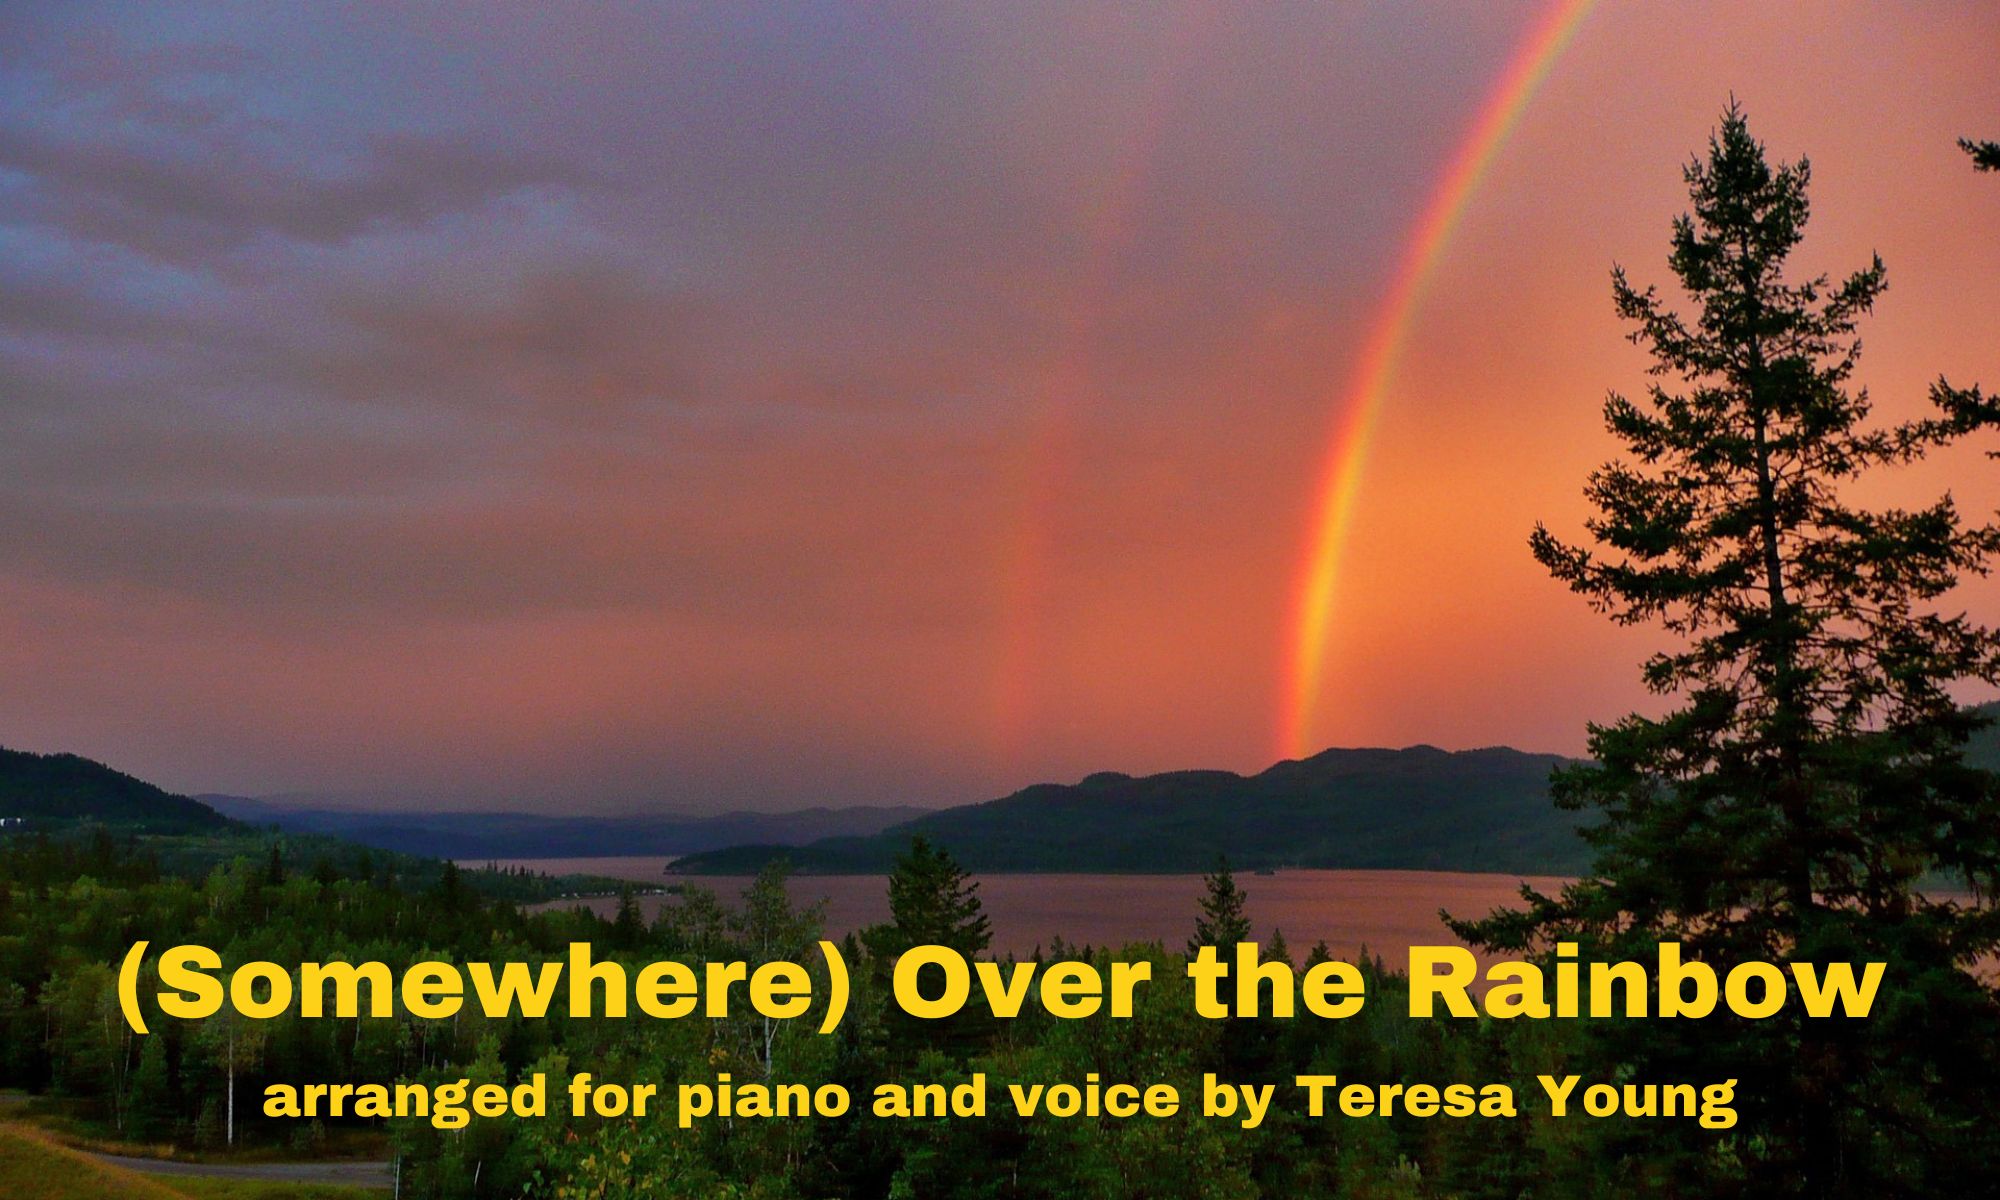 Over the Rainbow arr. Teresa Young